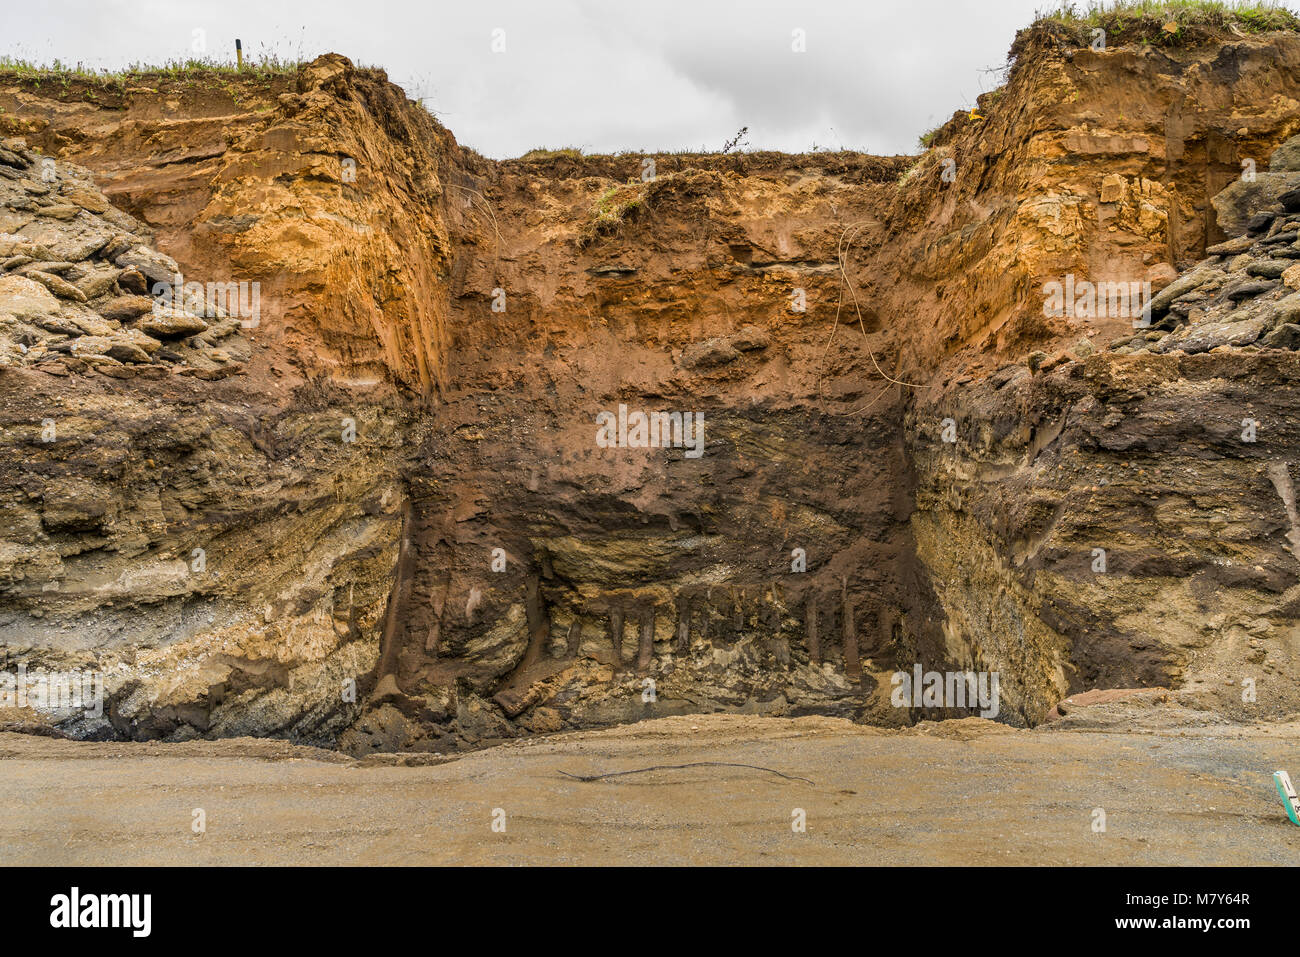 Multiple layers of earth showing deposits of ash from eruptions and volcanic activity, South Coast, Iceland Stock Photo